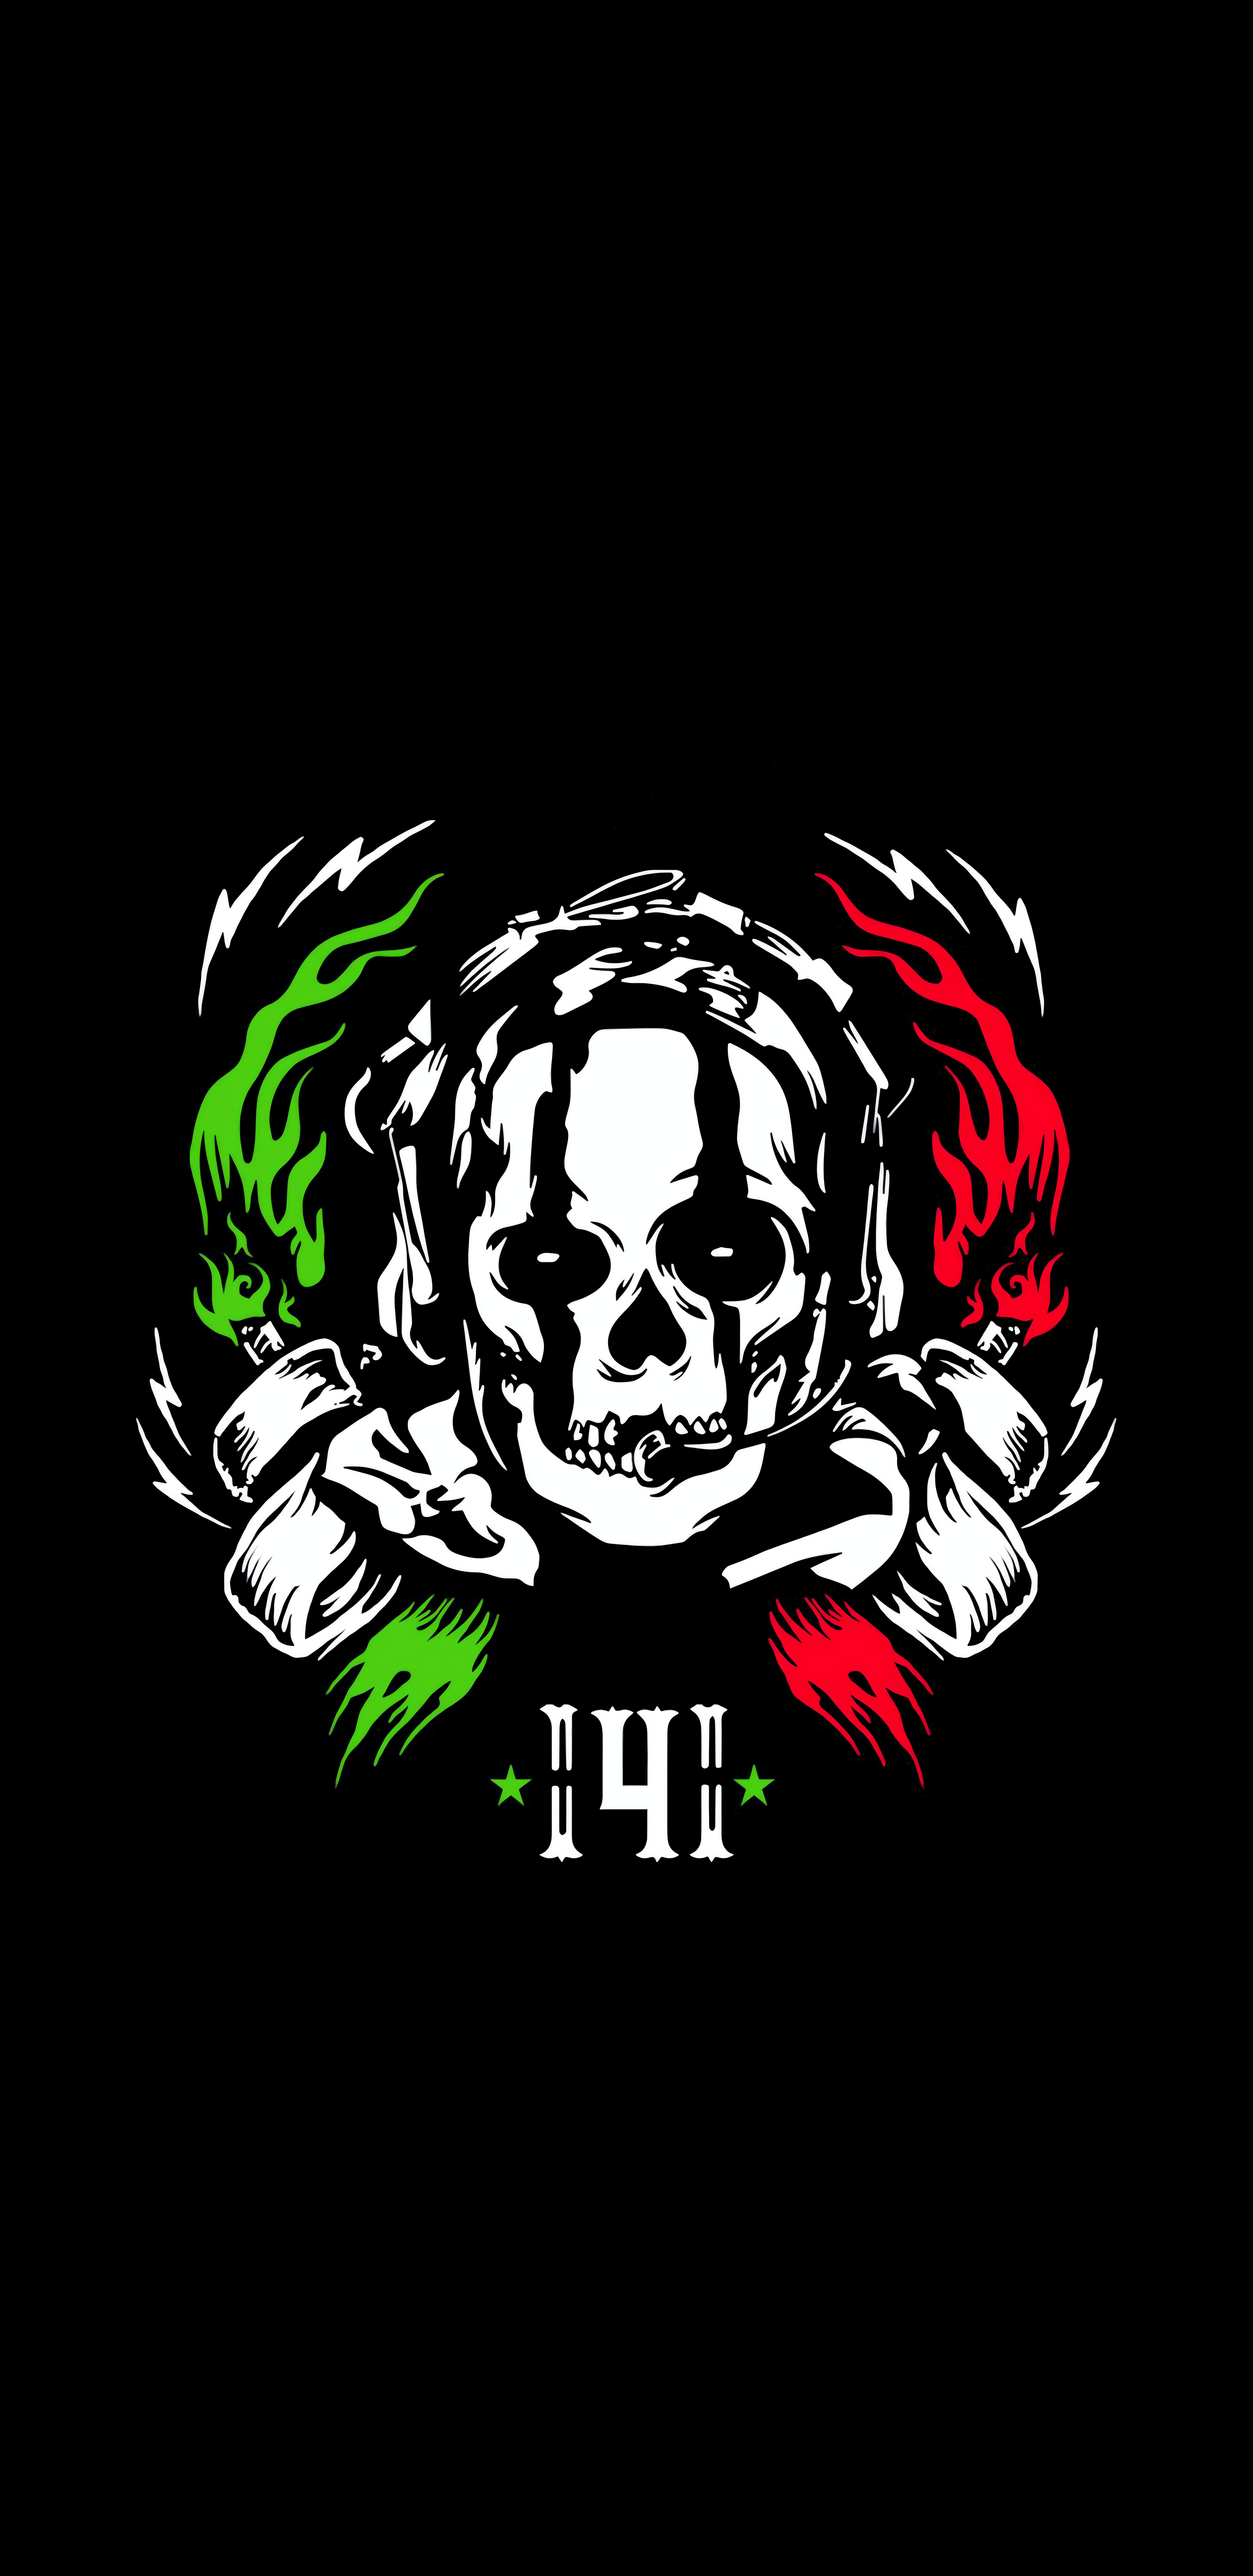 General 2880x5920 Call of Duty ghost Mexico skull portrait display black background simple background minimalism logo